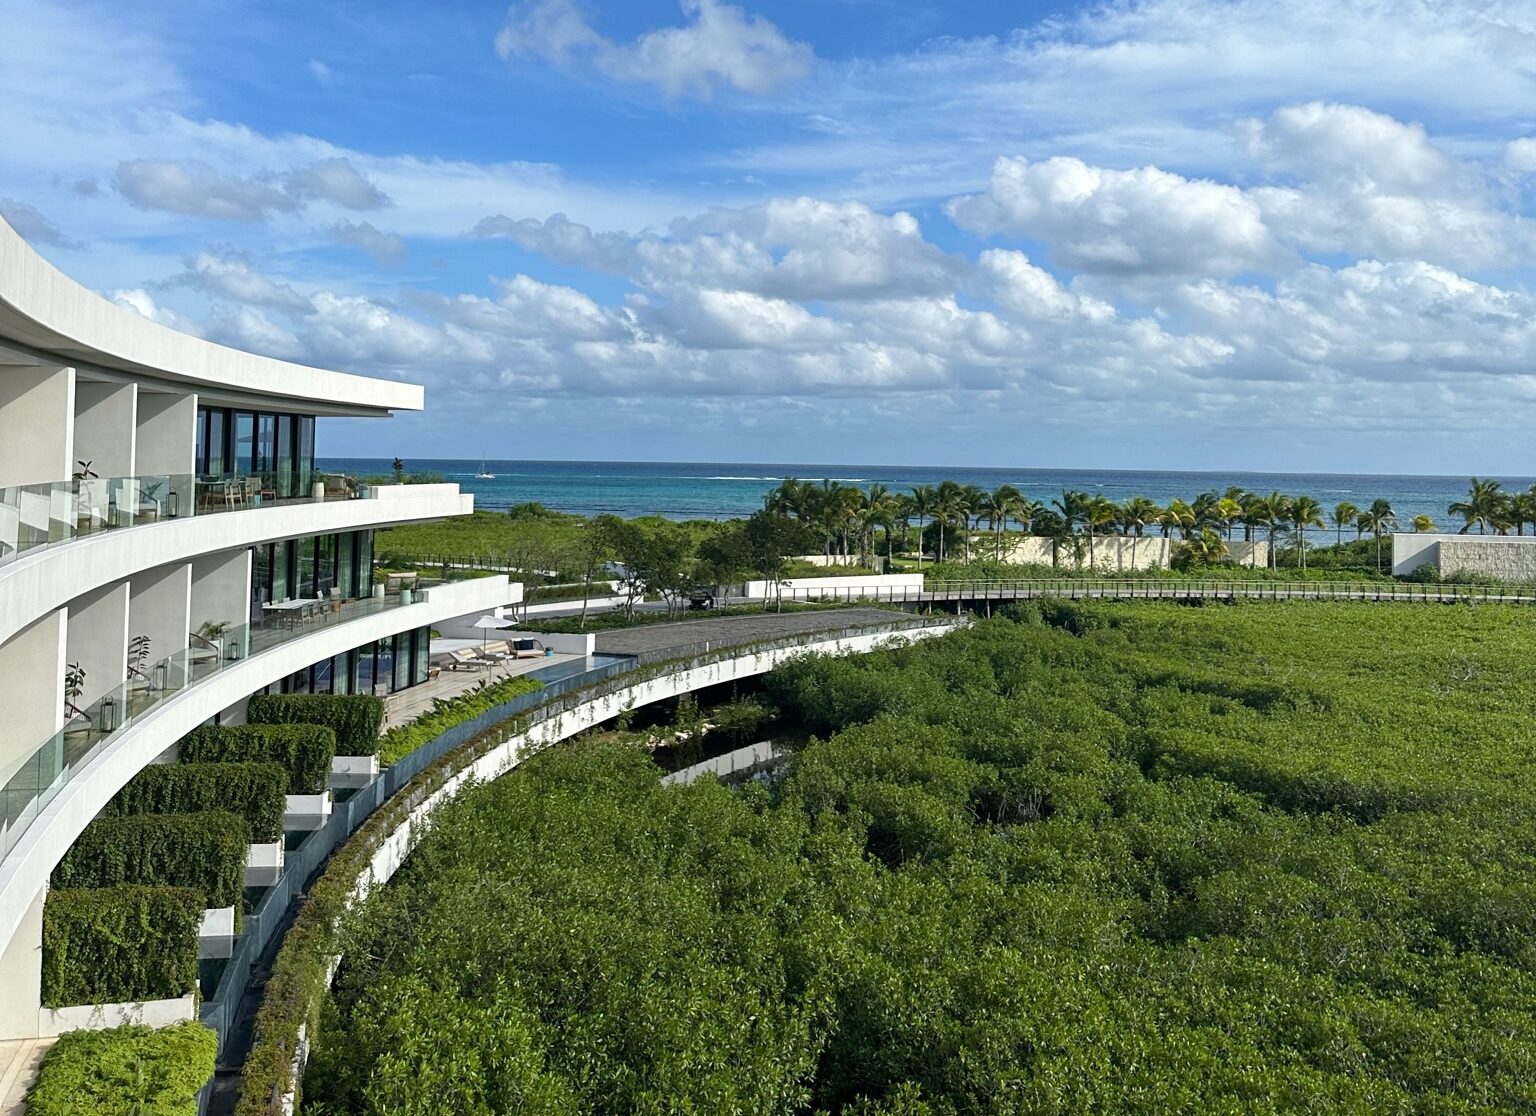 view of hotel, mangroves, and ocean